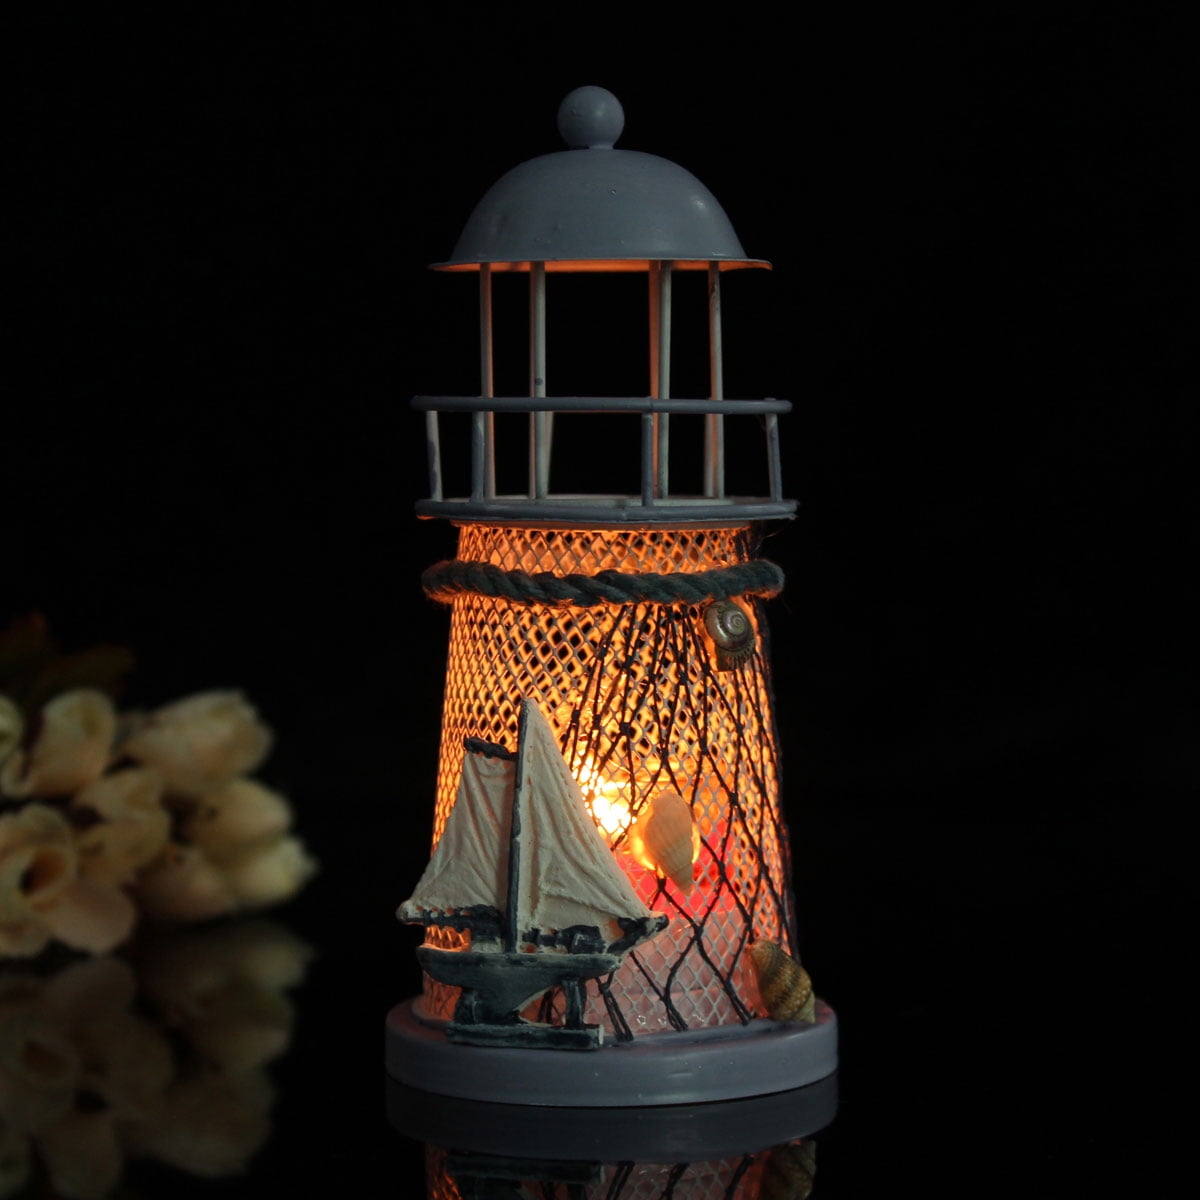 Lot 6 White Lighthouse 11.5" Tall Lantern Candle Holder Wedding Centerpieces 